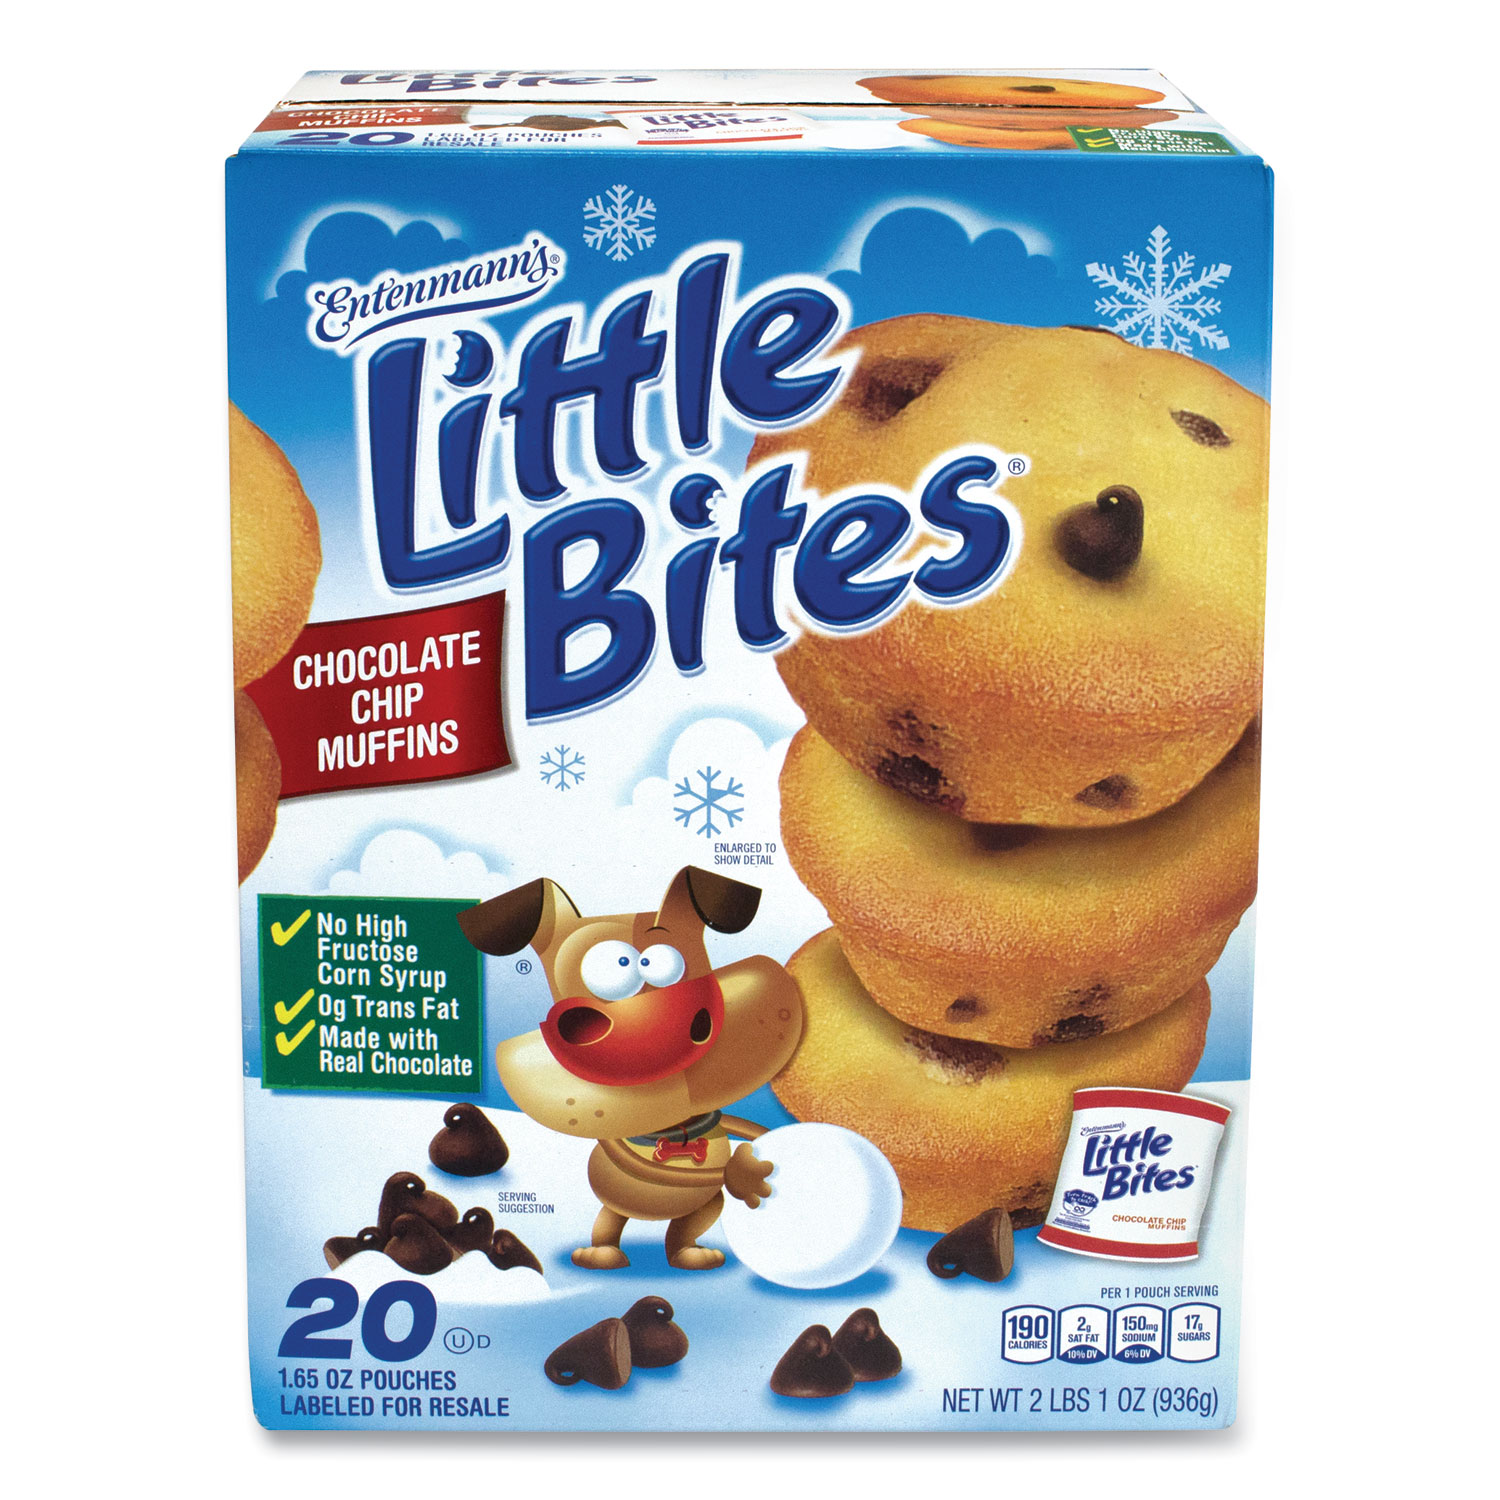 Entenmanns Little Bites® Little Bites Muffins, Chocolate Chip, 1.65 oz Pouch, 20 Pouches/Box, Free Delivery in 1-4 Business Days